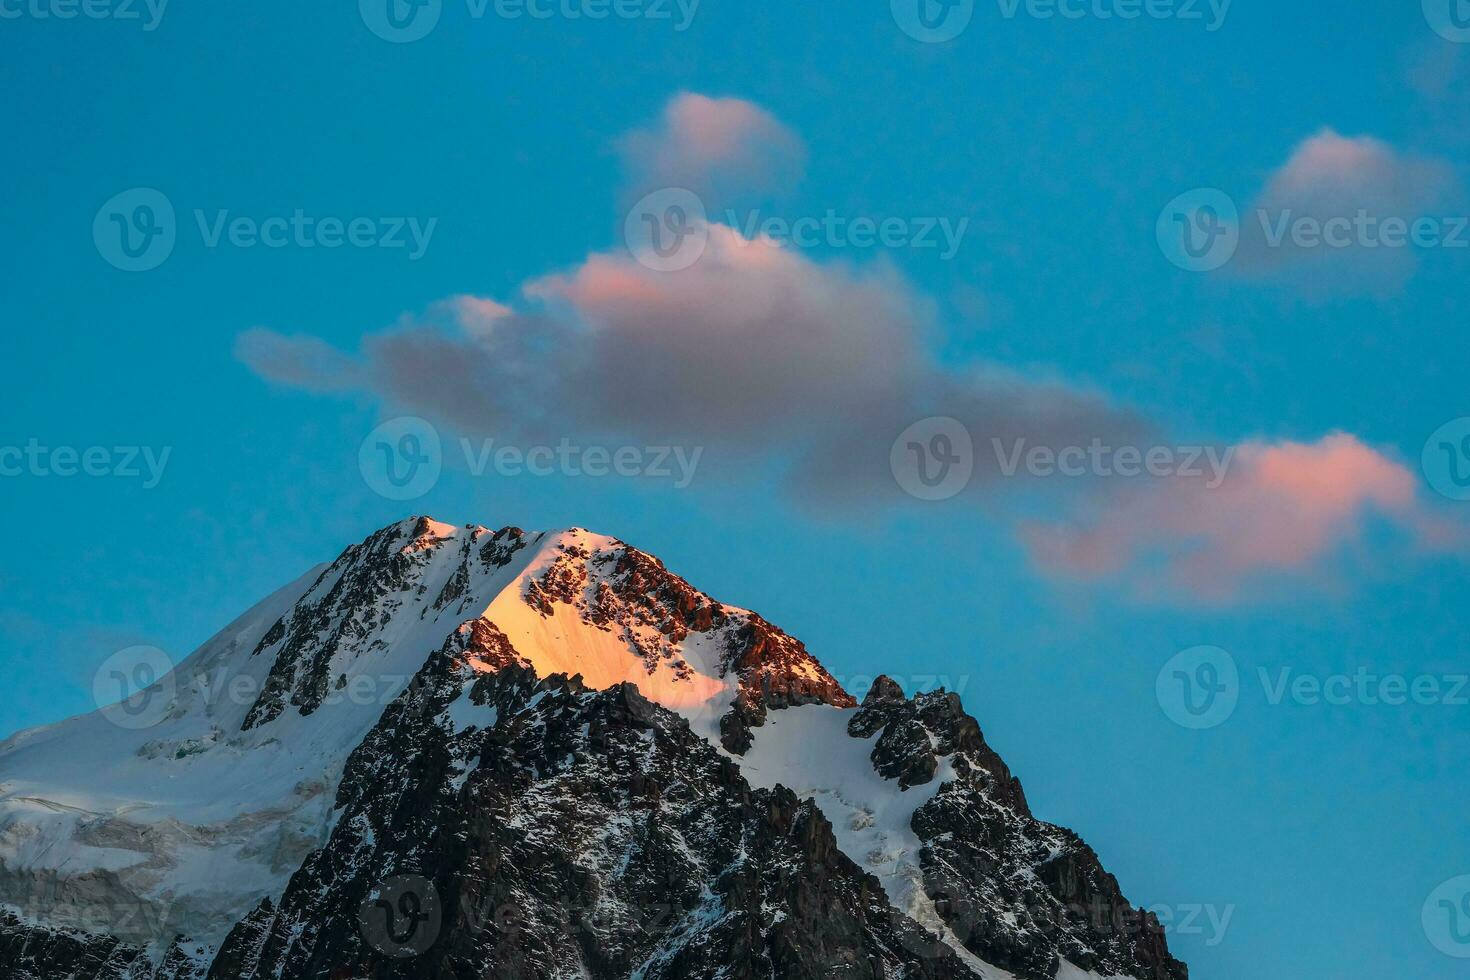 Top black rocks in evening golden sunshine and white-snow pointy peak. Atmospheric dawn landscape with high snowy mountain with peaked top. photo